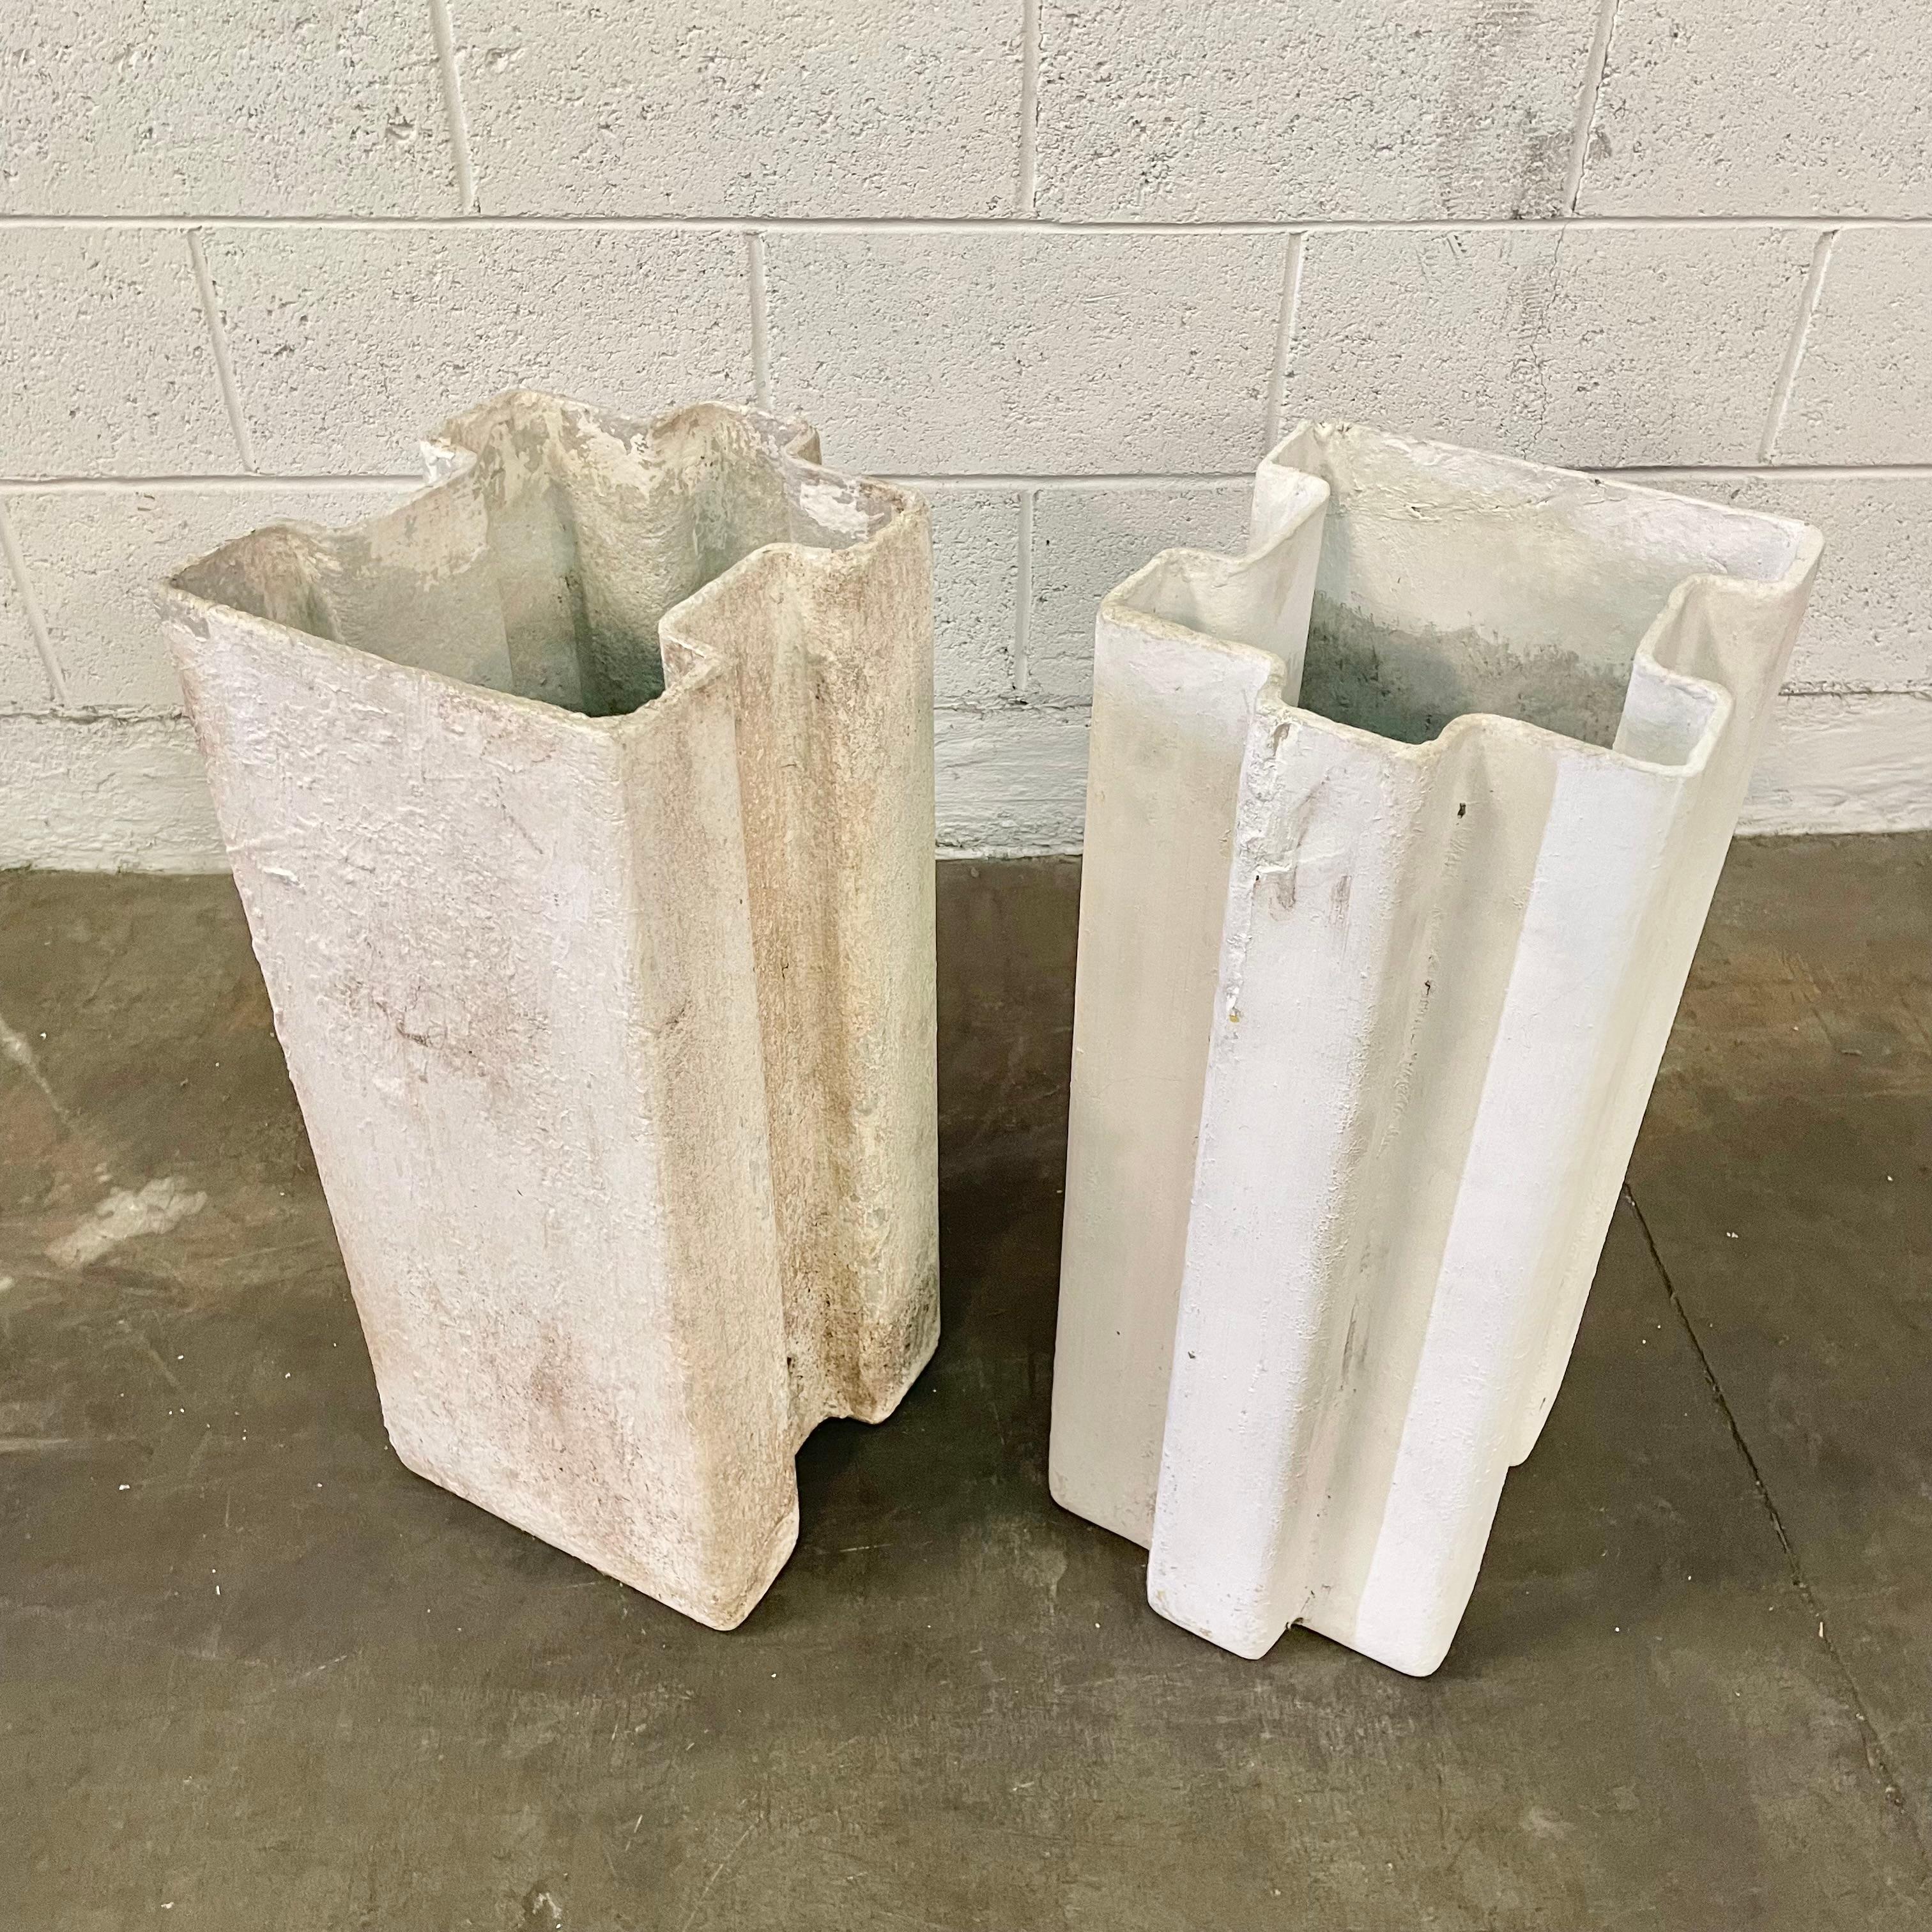 Fantastic sculptural piece by Swiss architect Willy Guhl. Tall planters shaped like  jigsaw puzzle pieces. One is painted white while the other is in the original concrete. Cool sculptural piece for indoors or outside. Great standalone piece of art.